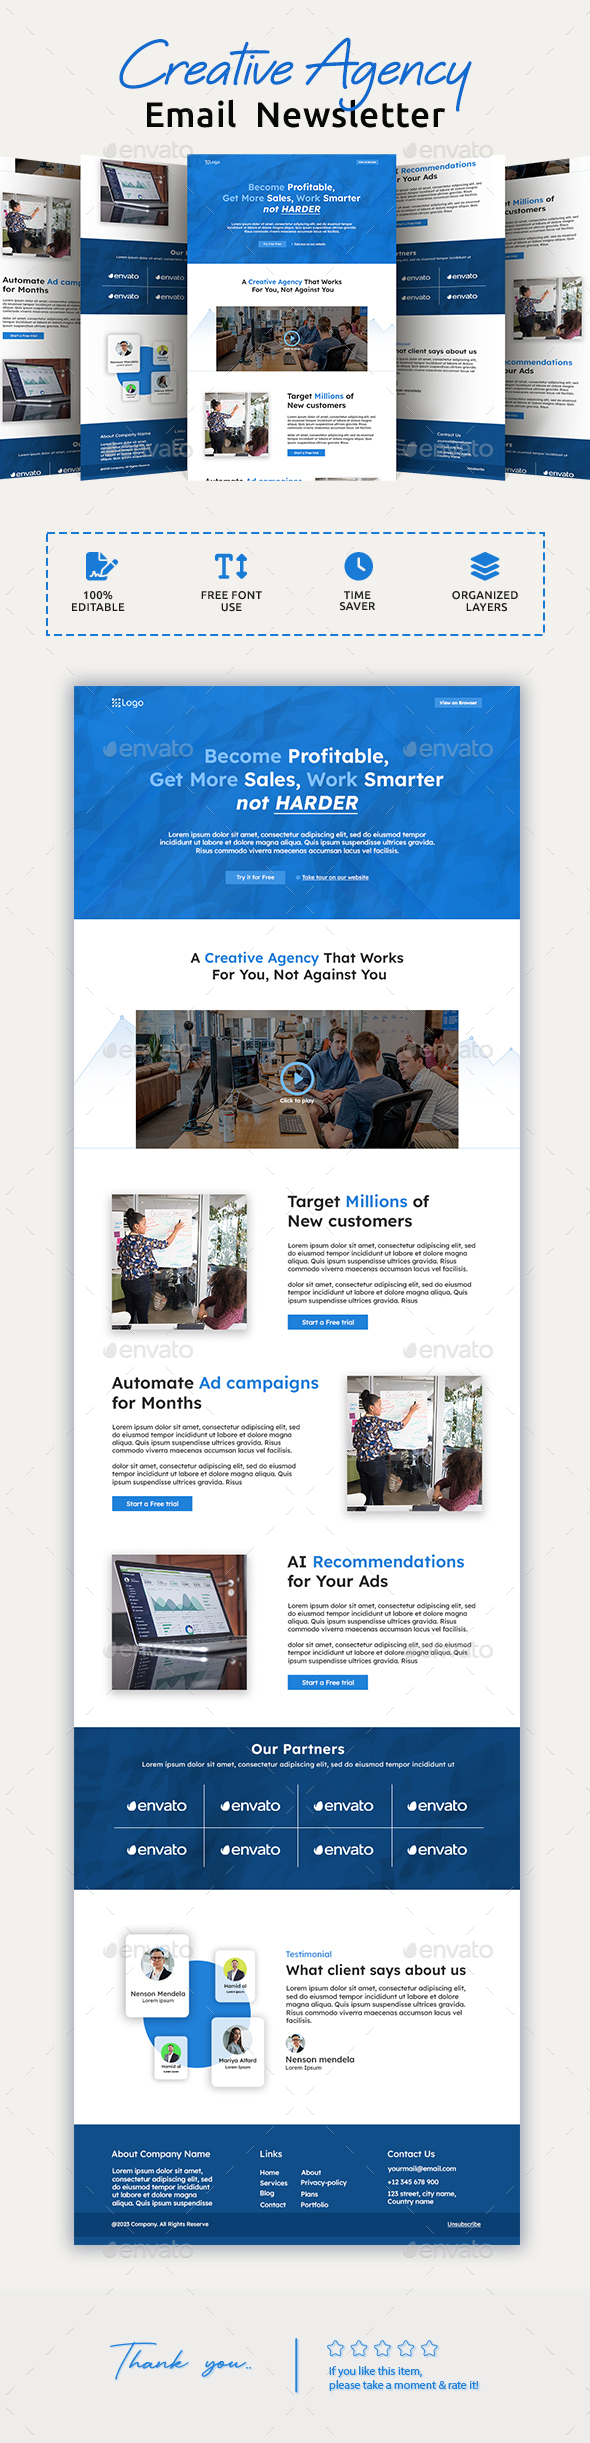 [DOWNLOAD]Creative Agency Email Newsletter PSD Template